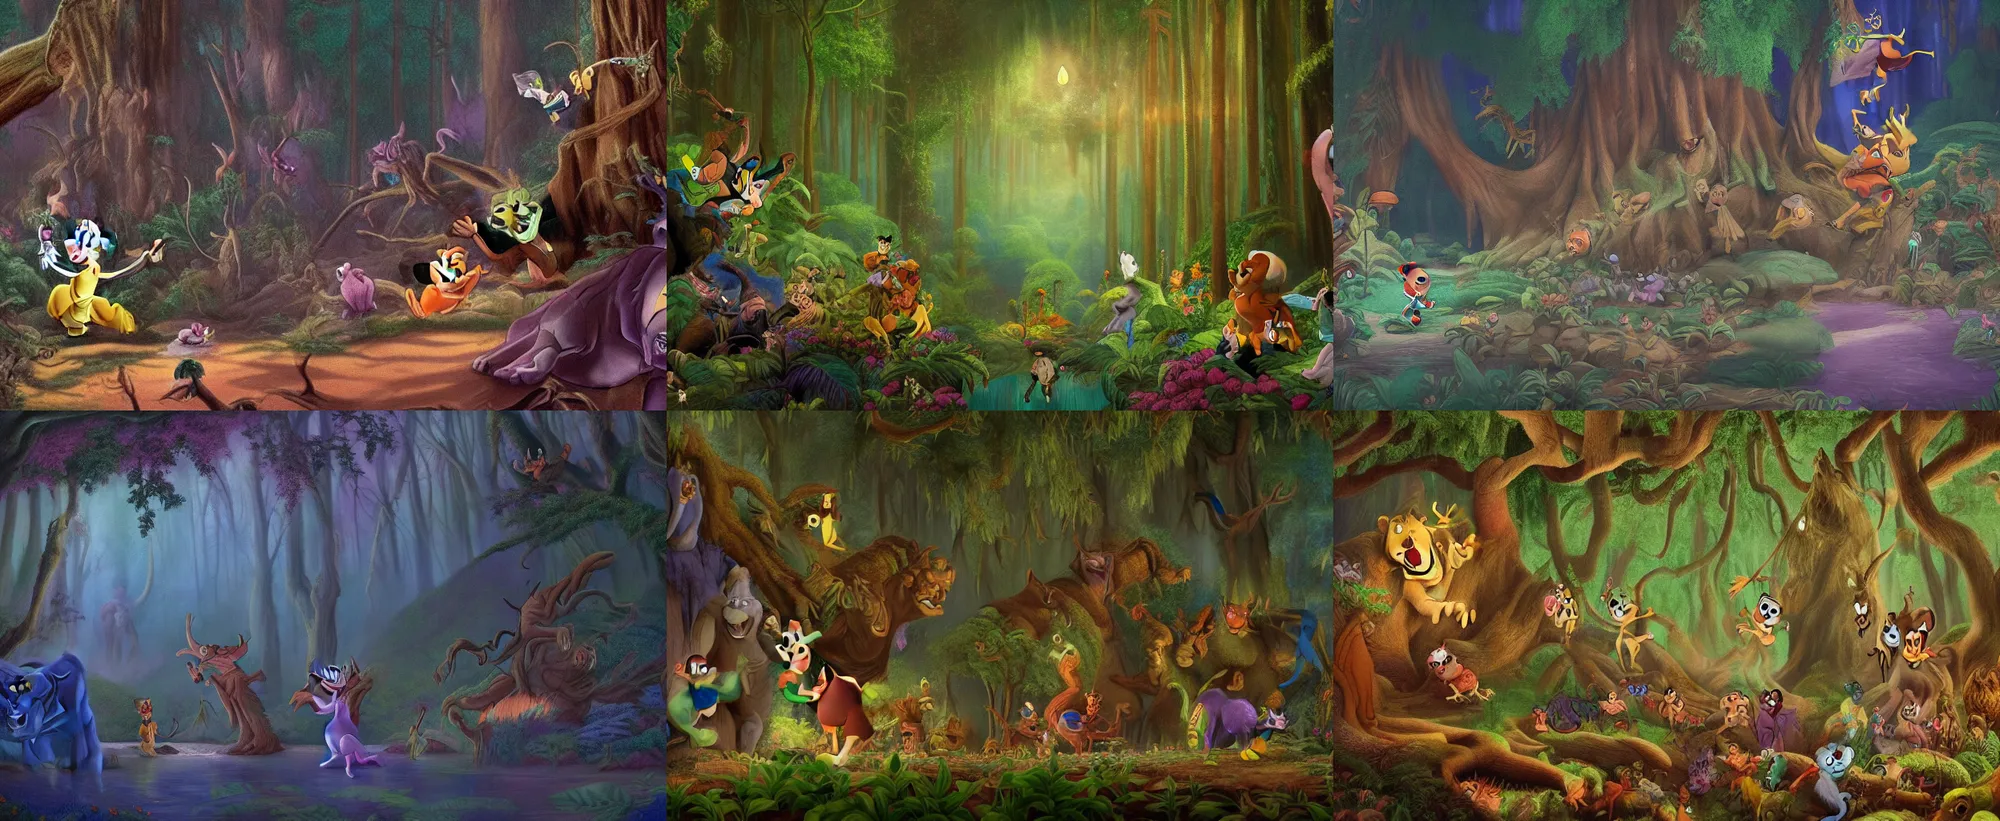 Prompt: Movie frame from the coloured Disney animated motion picture released in 1937, evil Mark Zuckerberg shaped creatures are living in the forest, beautiful enchanted forest full of critters, directed by Walt Disney, highly detailed background paintings by Thomas Kinkade